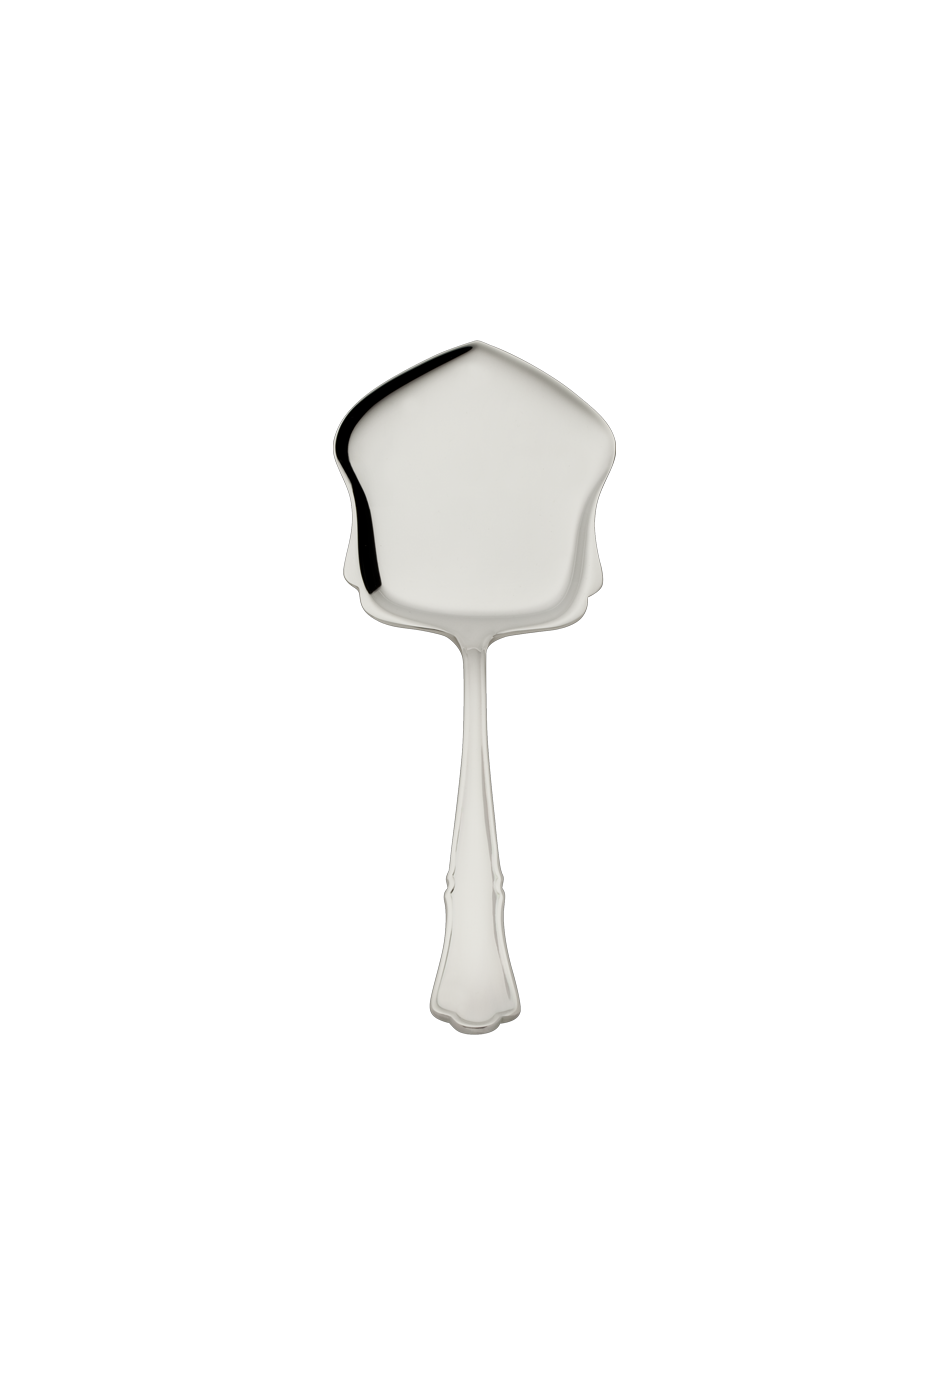 Alt-Chippendale Pastry Server (150g massive silverplated)